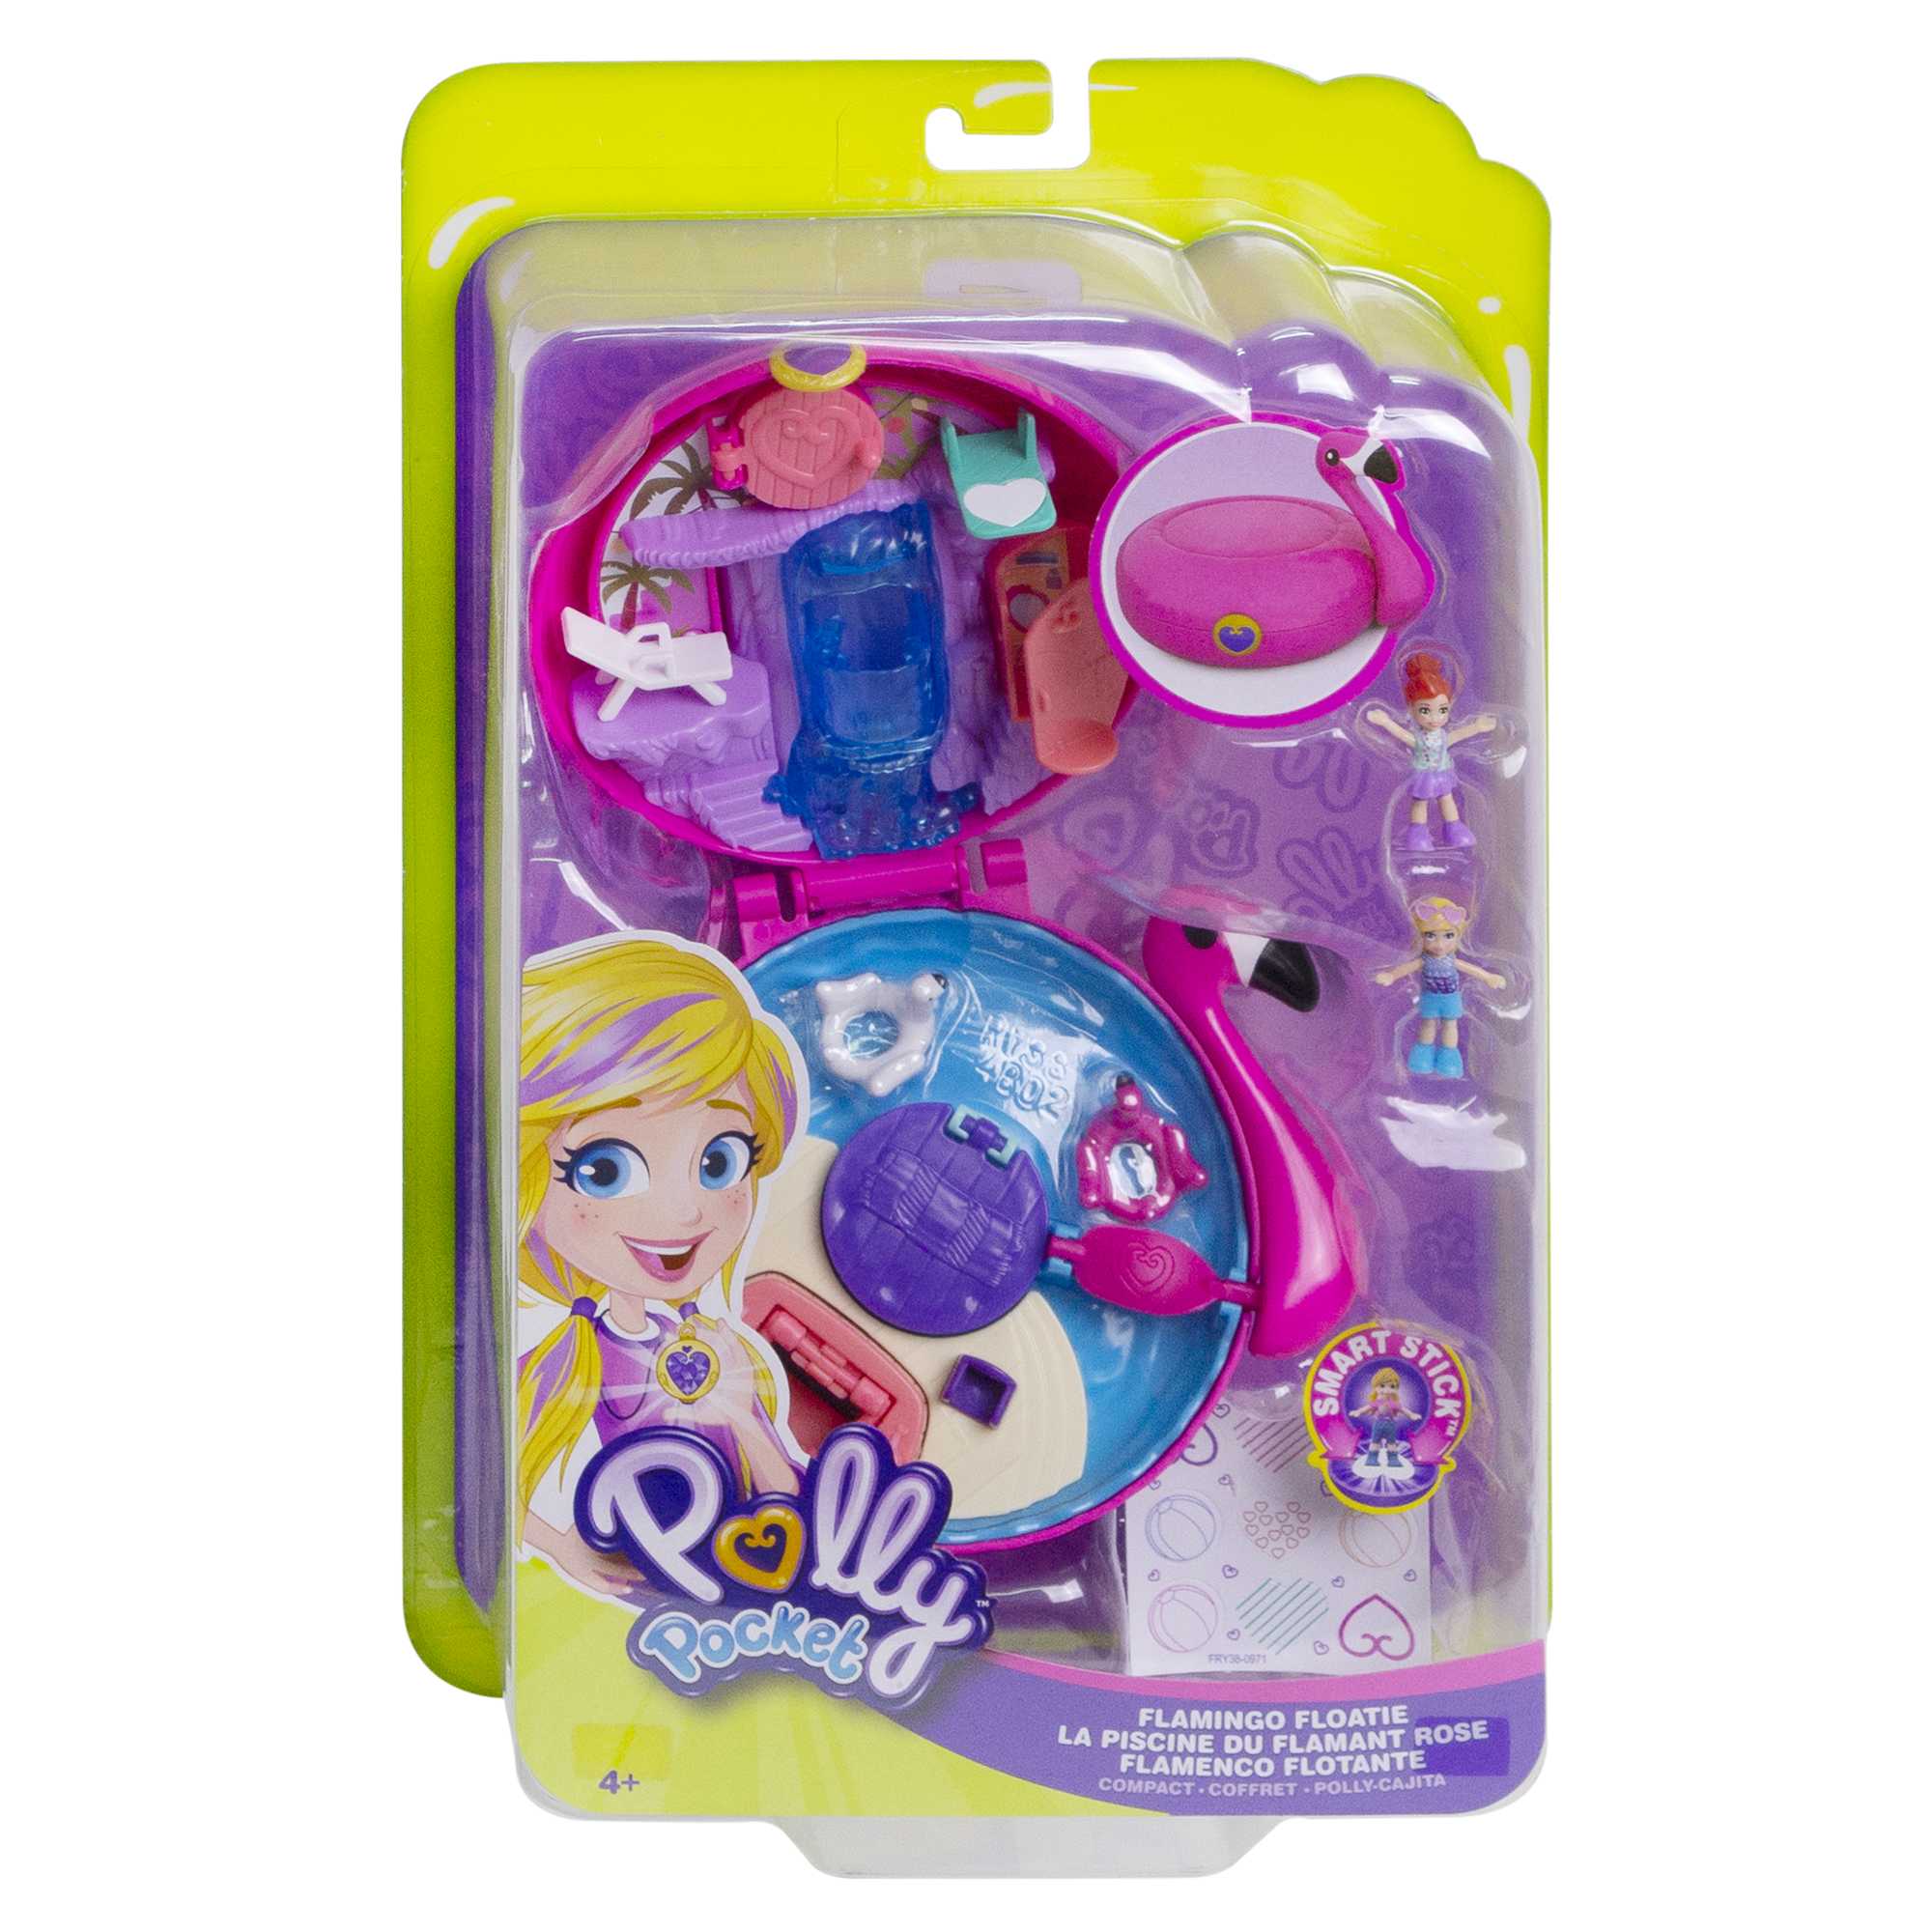 Polly Pocket World Flamingo Floatie Compact With Water Theme | Mattel